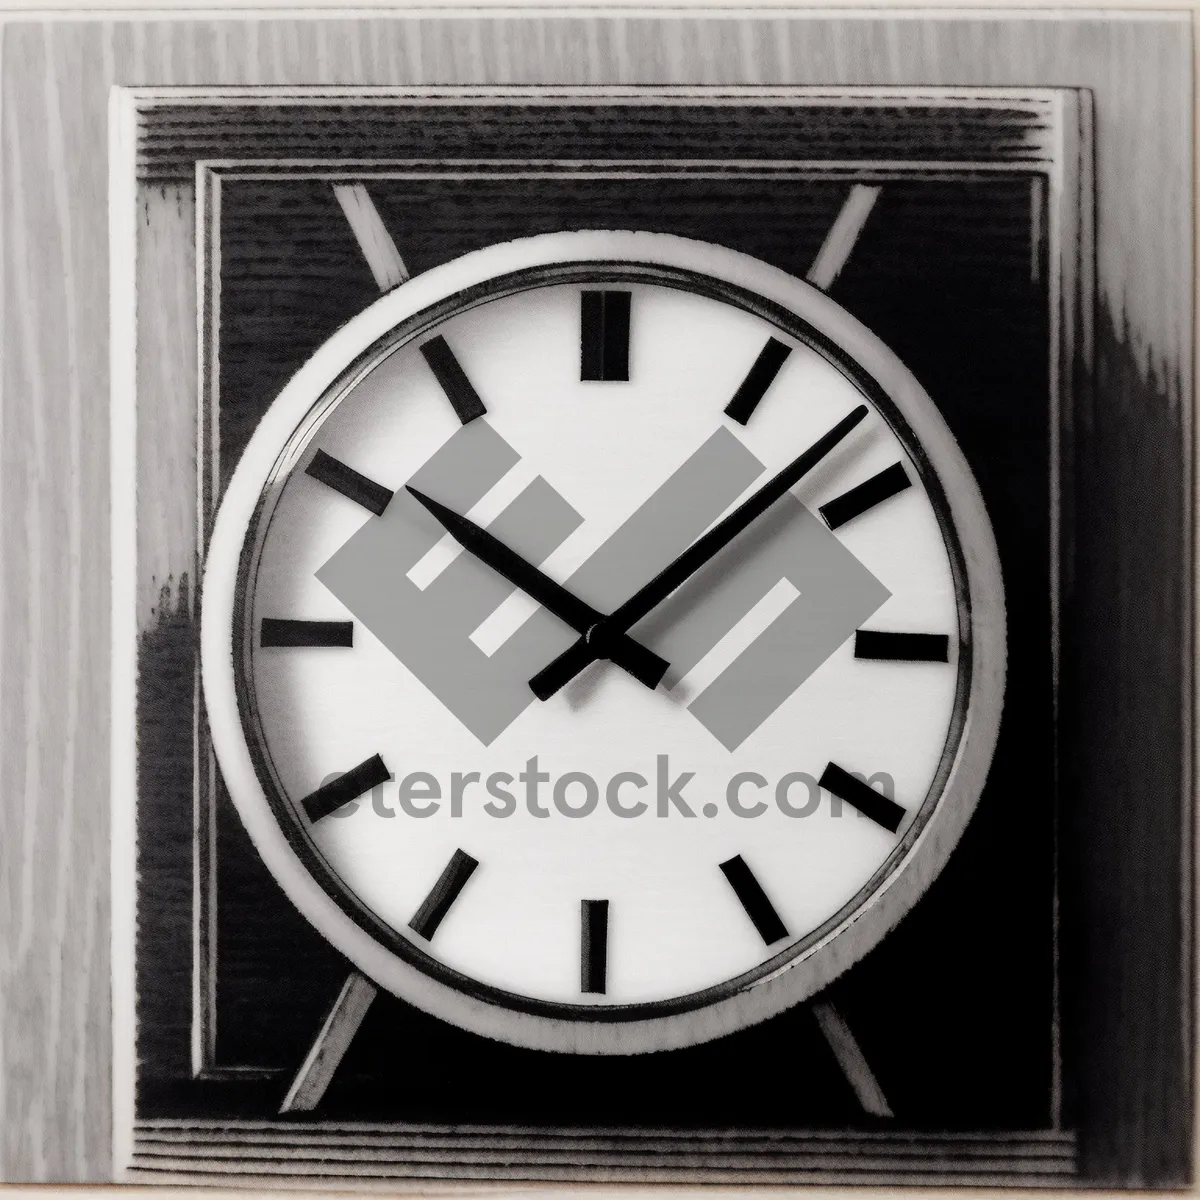 Picture of Analog Wall Clock with Classic Time Display